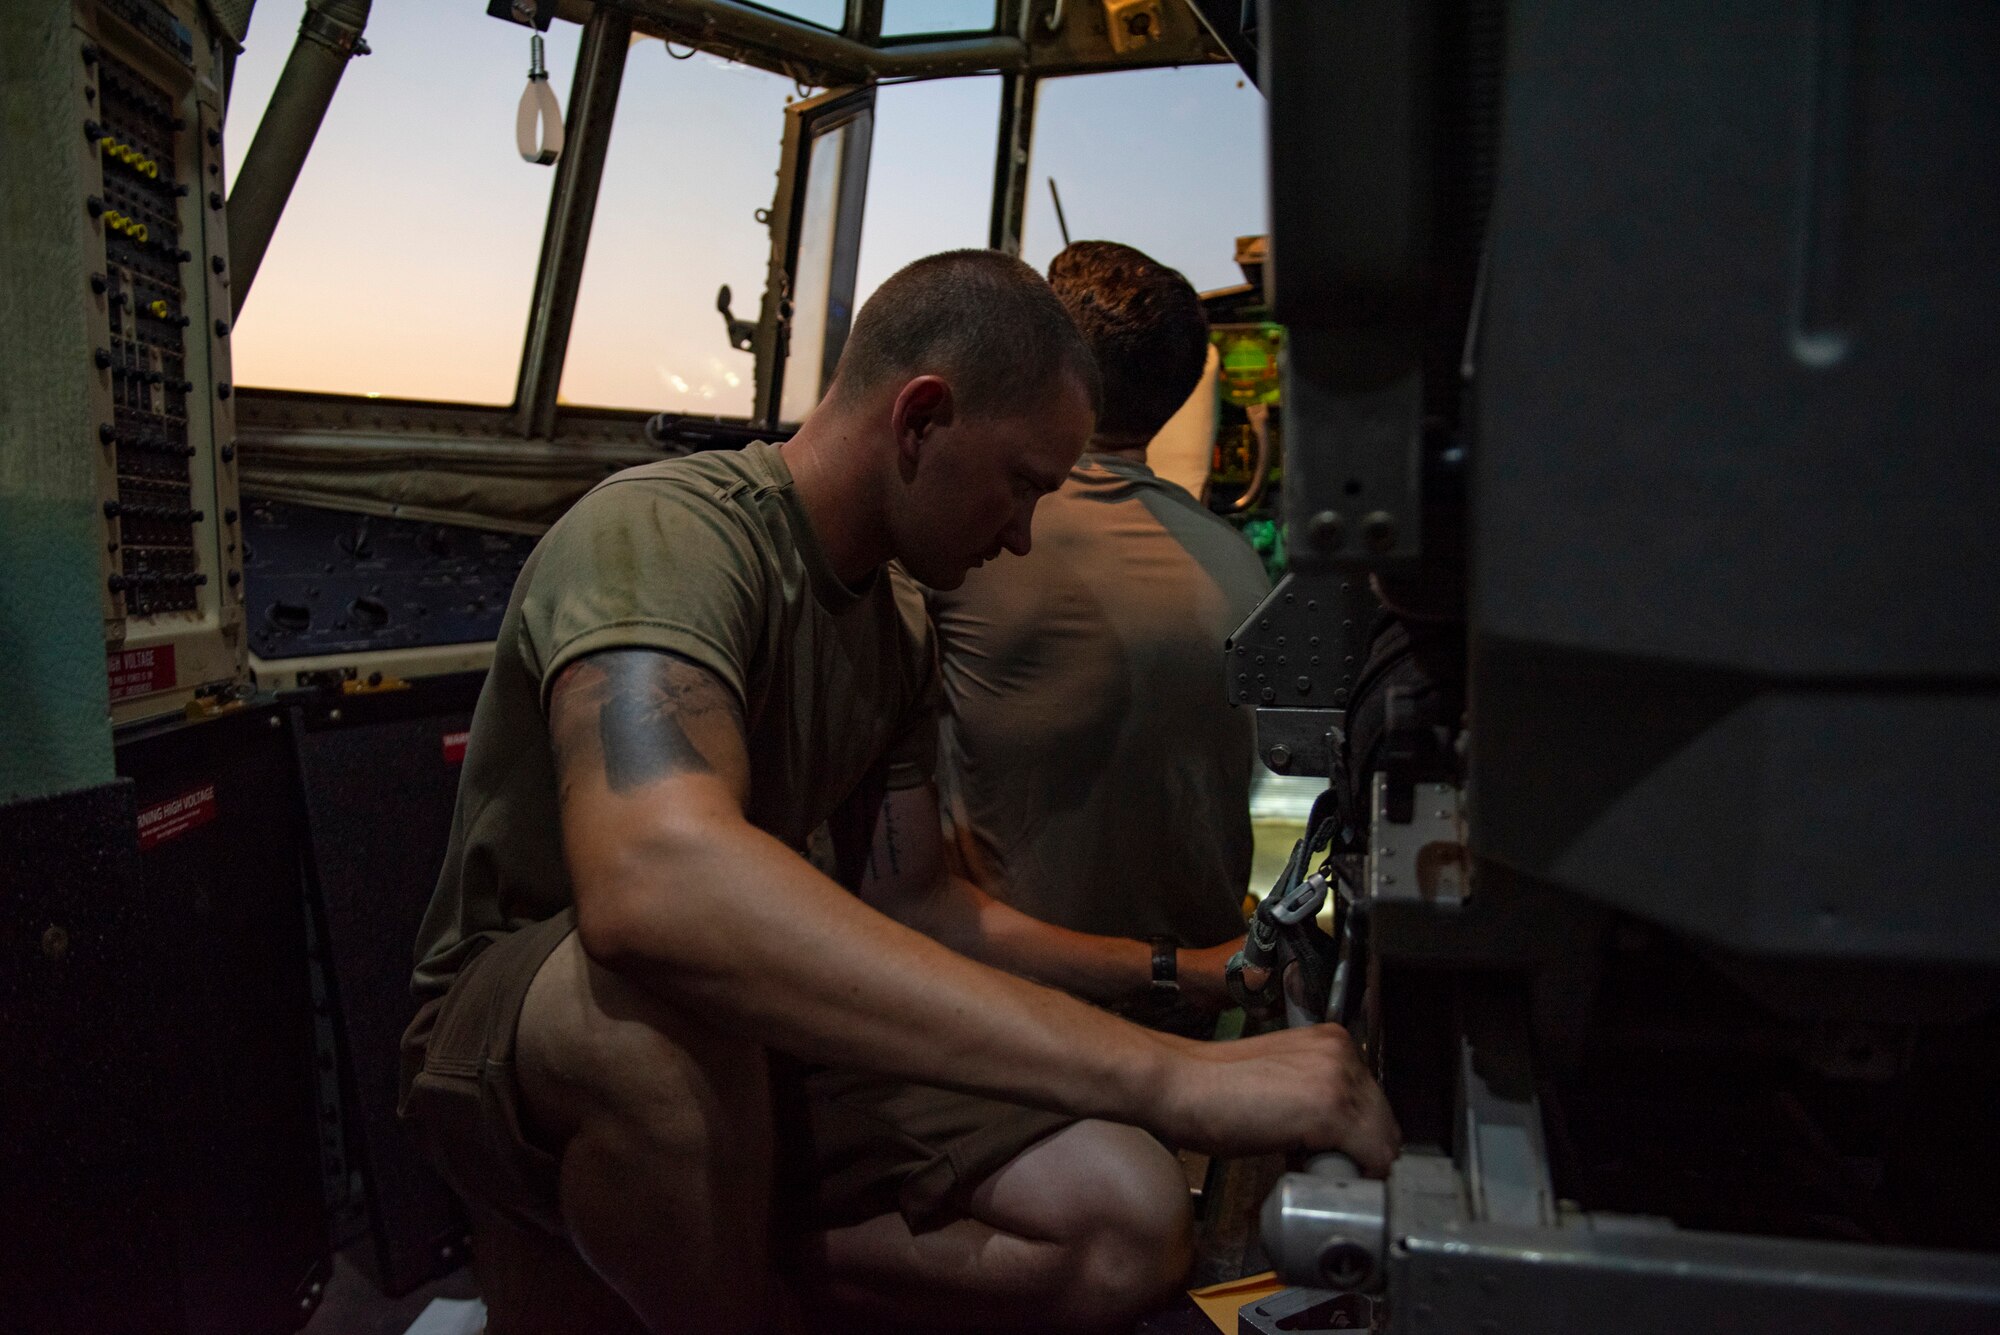 U.S. Air Force Senior Airman Christian Pettus, a crew chief assigned to the 386th Expeditionary Aircraft Maintenance Squadron and deployed from Maxwell Air Force Base, Alabama, removes bolts from a panel on a C-130 Hercules at Ali Al Salem Air Base, Kuwait, July 20, 2021. The EAMXS works 24-hour operations year-round to keep the C-130 Hercules’ in flight to accomplish the mission of fight to win today and to provide warfighter support in the area of responsibility. (U.S. Air Force Photo by Senior Airman Helena Owens)